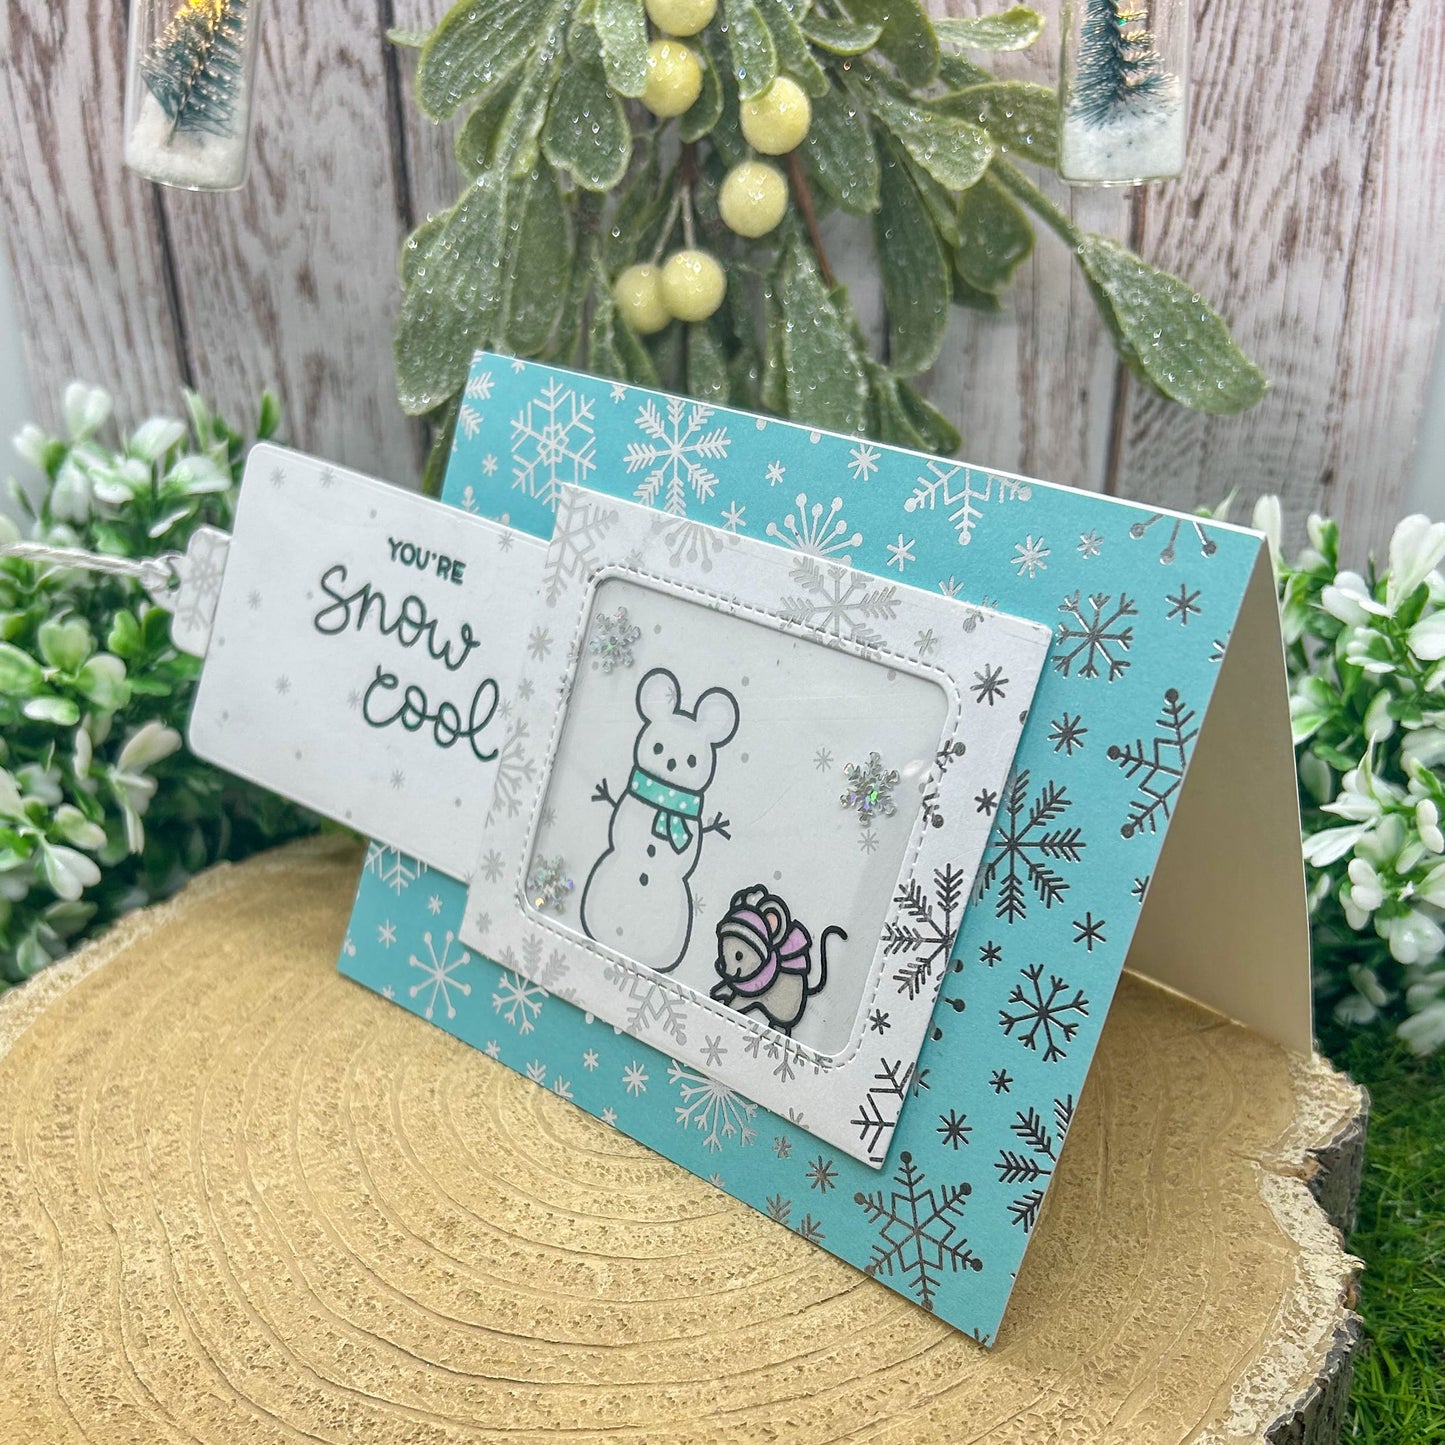 You're Snow Cool Pull Reveal Handmade Christmas Card-2